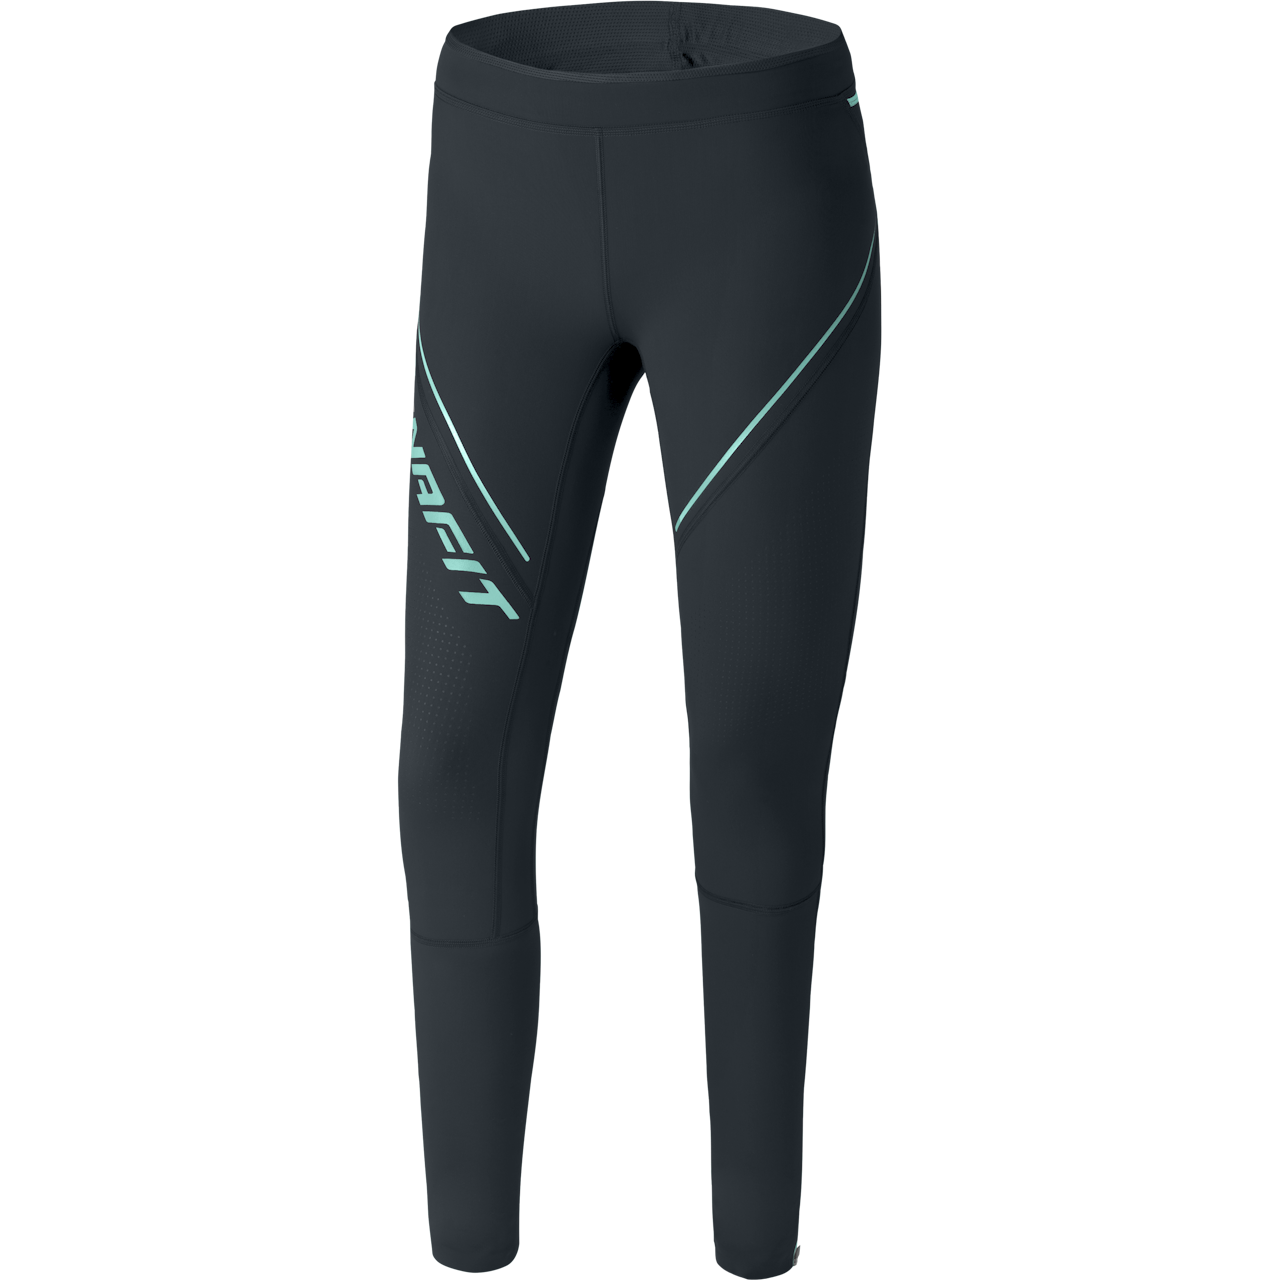 Running Tights With Pockets